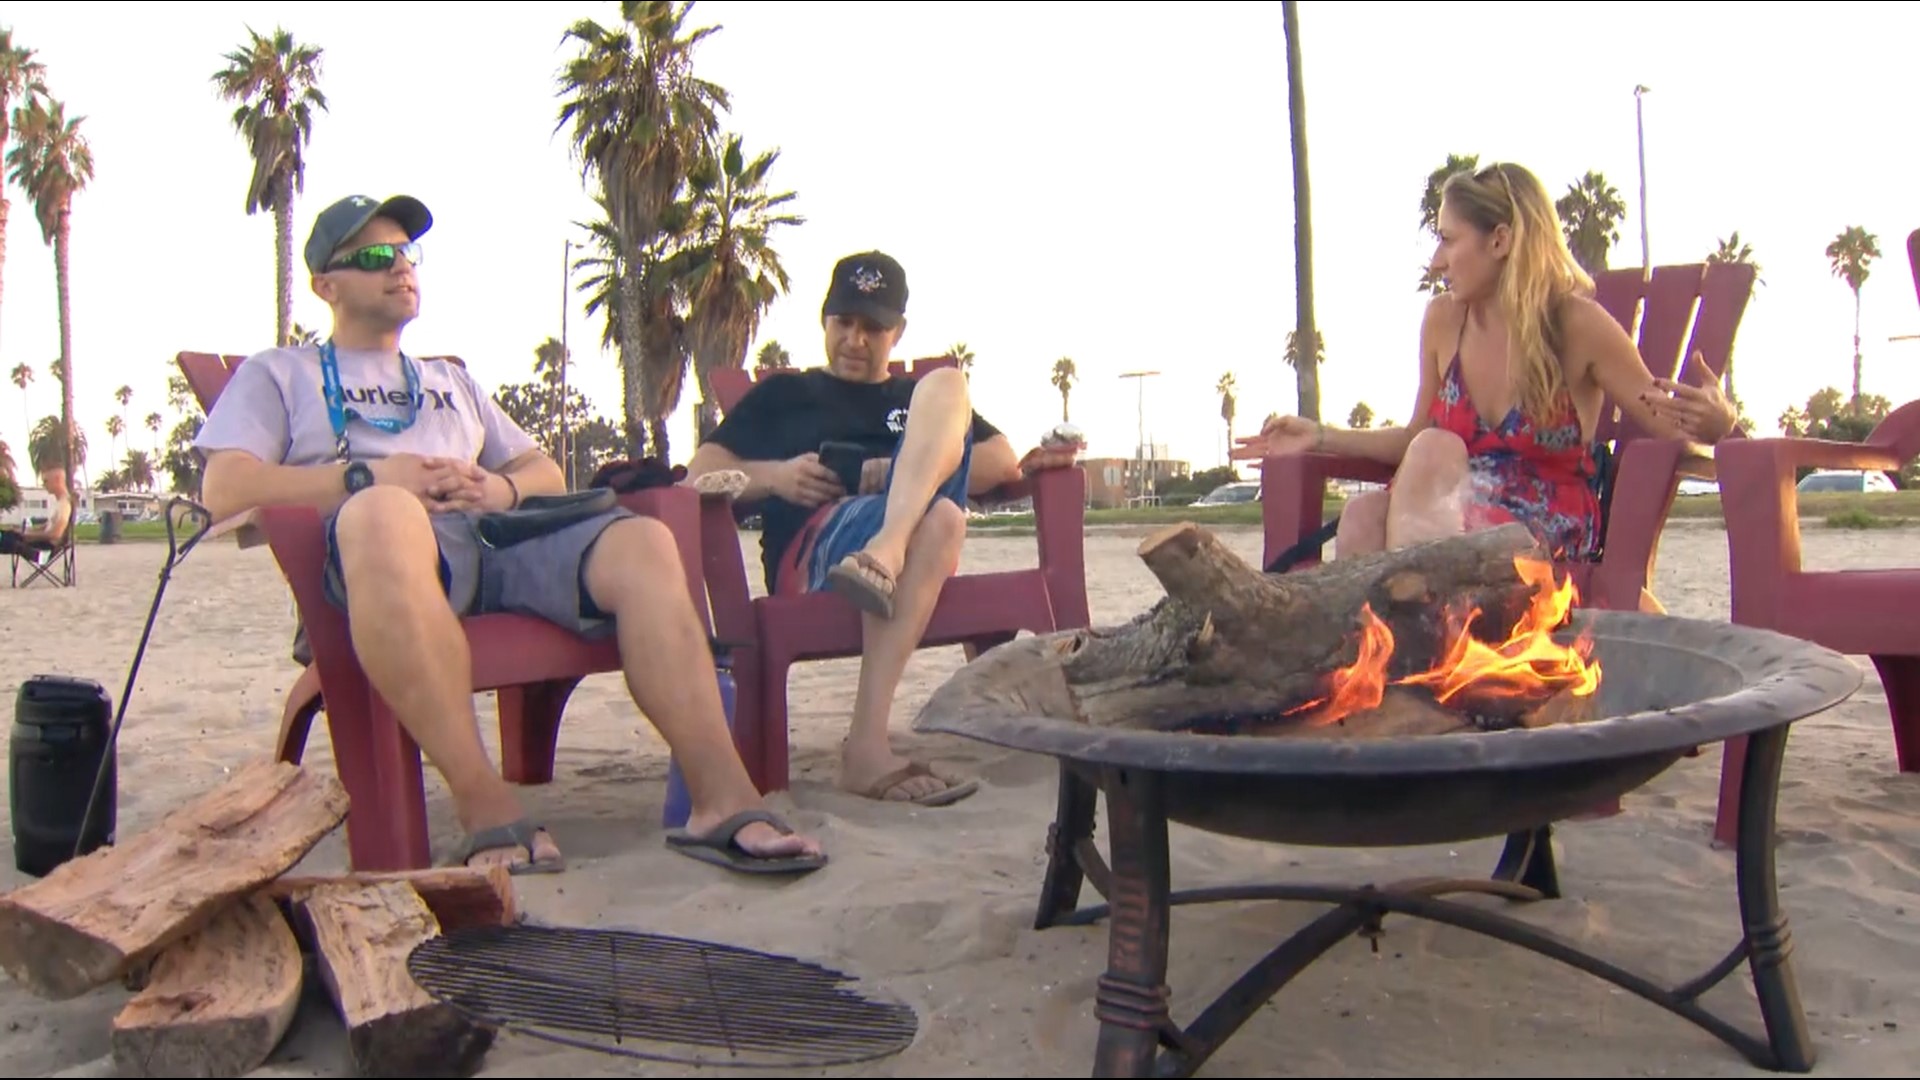 If you’re going to the beach for Labor Day weekend, bonfires outside City of San Diego designated rings are still legal. That could be changing soon.